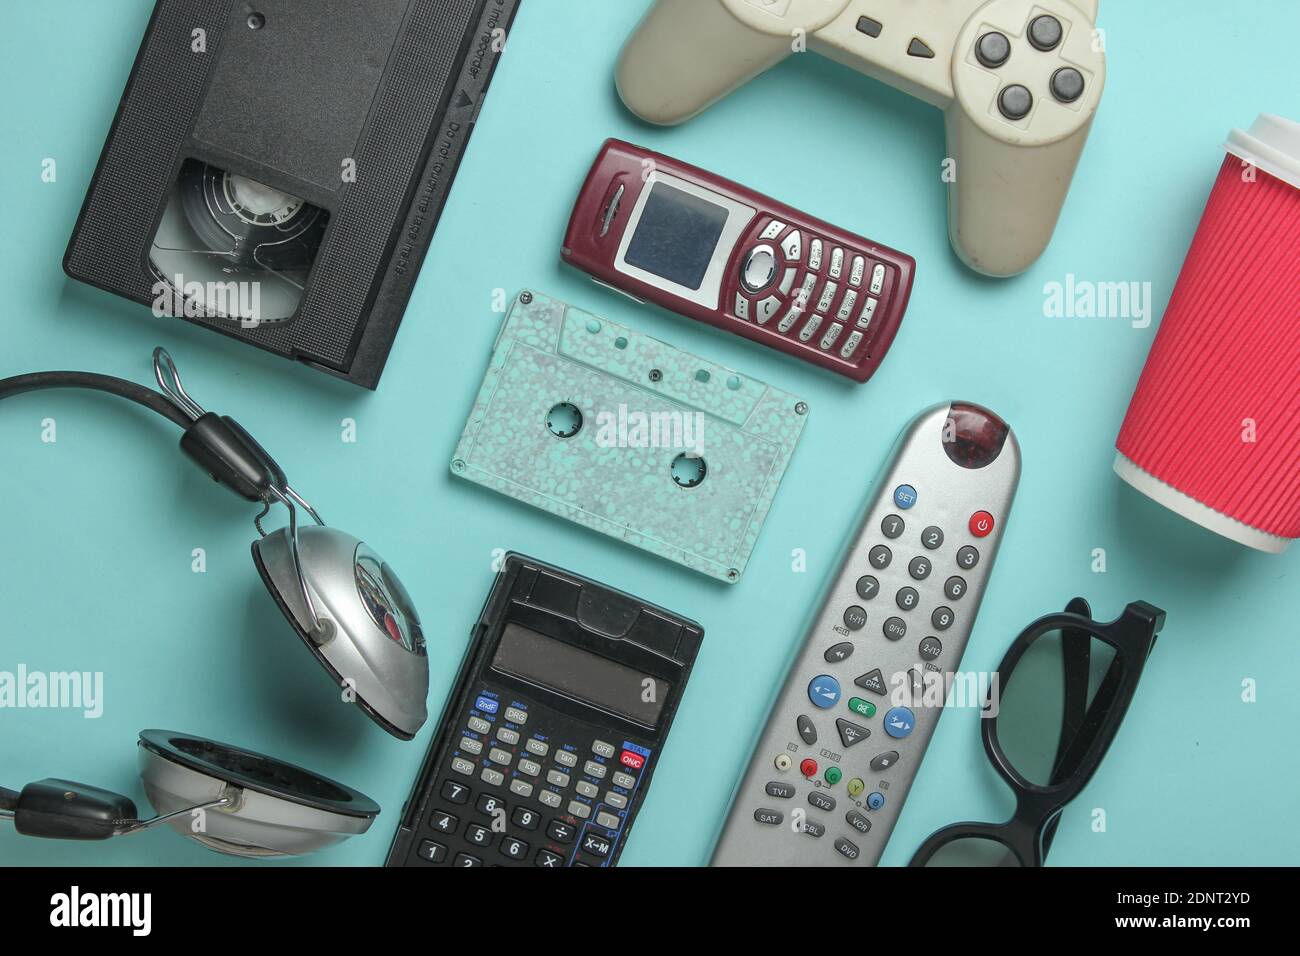 Retro objects on blue background. 3d glasses, audio cassette, video cassette, gamepad,calculator, tv remote, headphones, push-button phone. Analog med Stock Photo